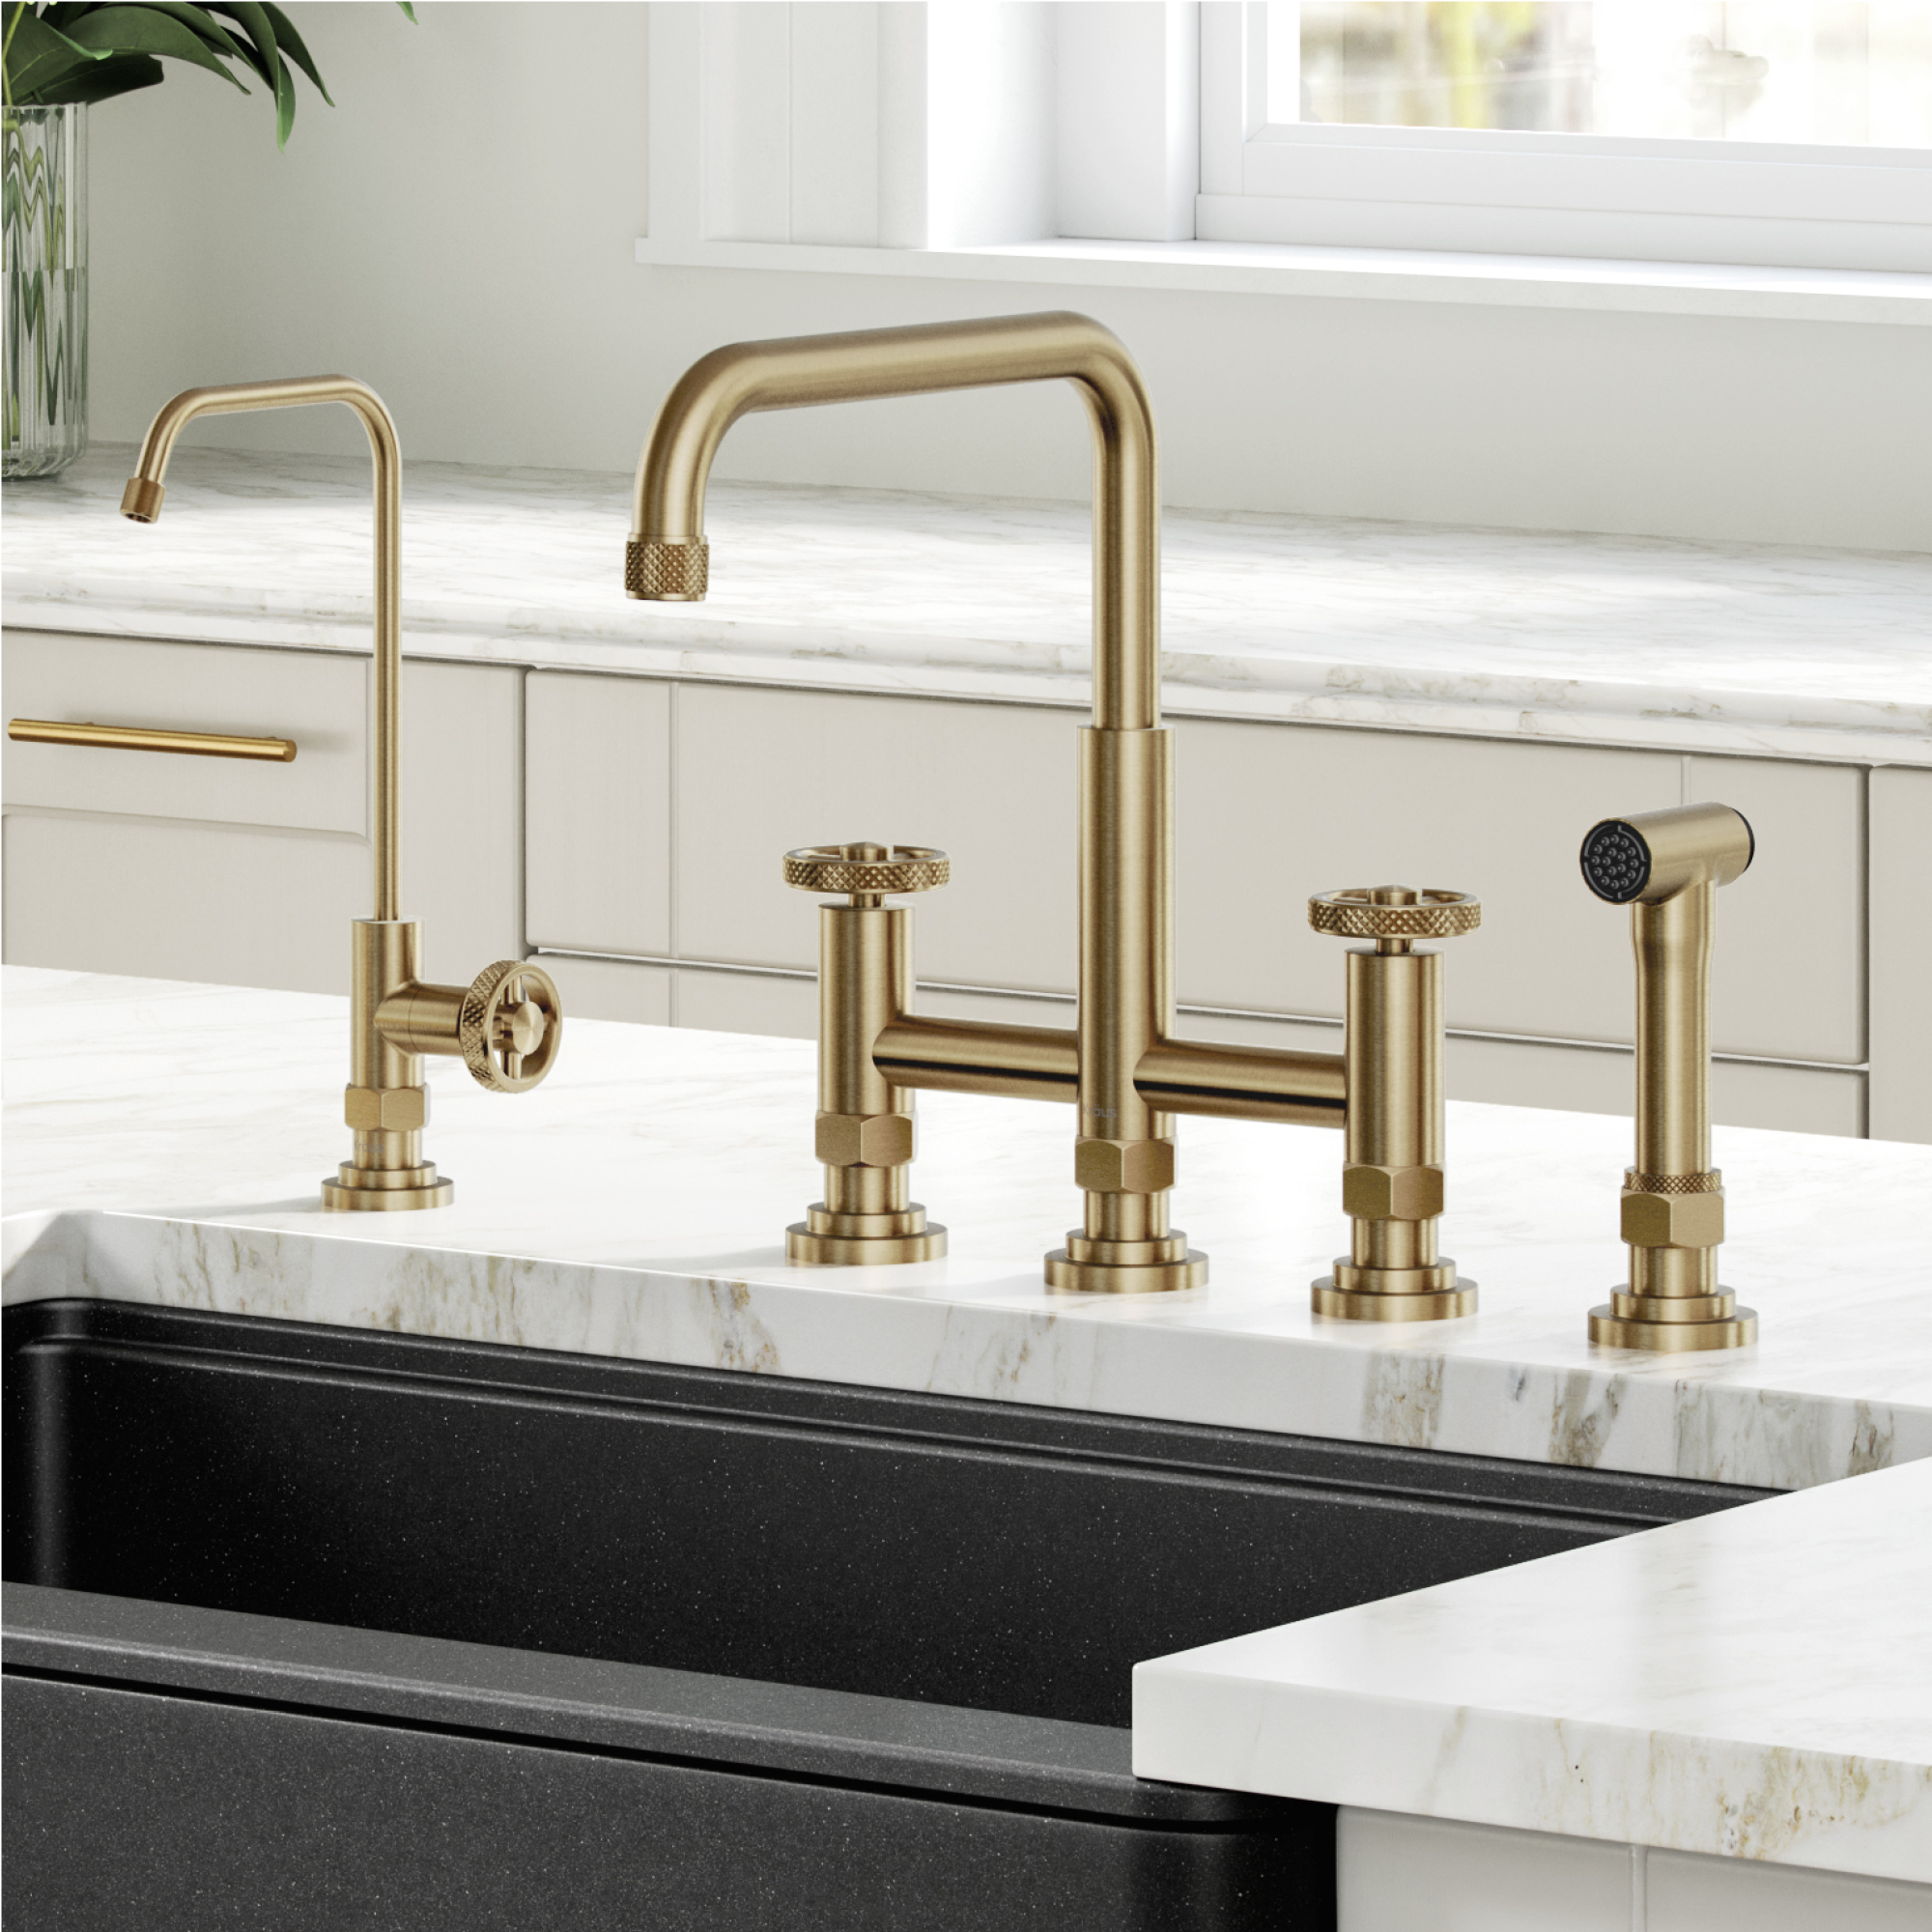 KRAUS Urbix™ Industrial Bridge Kitchen Faucet and Water Filter Faucet Combo in Brushed Gold - image 2 of 12